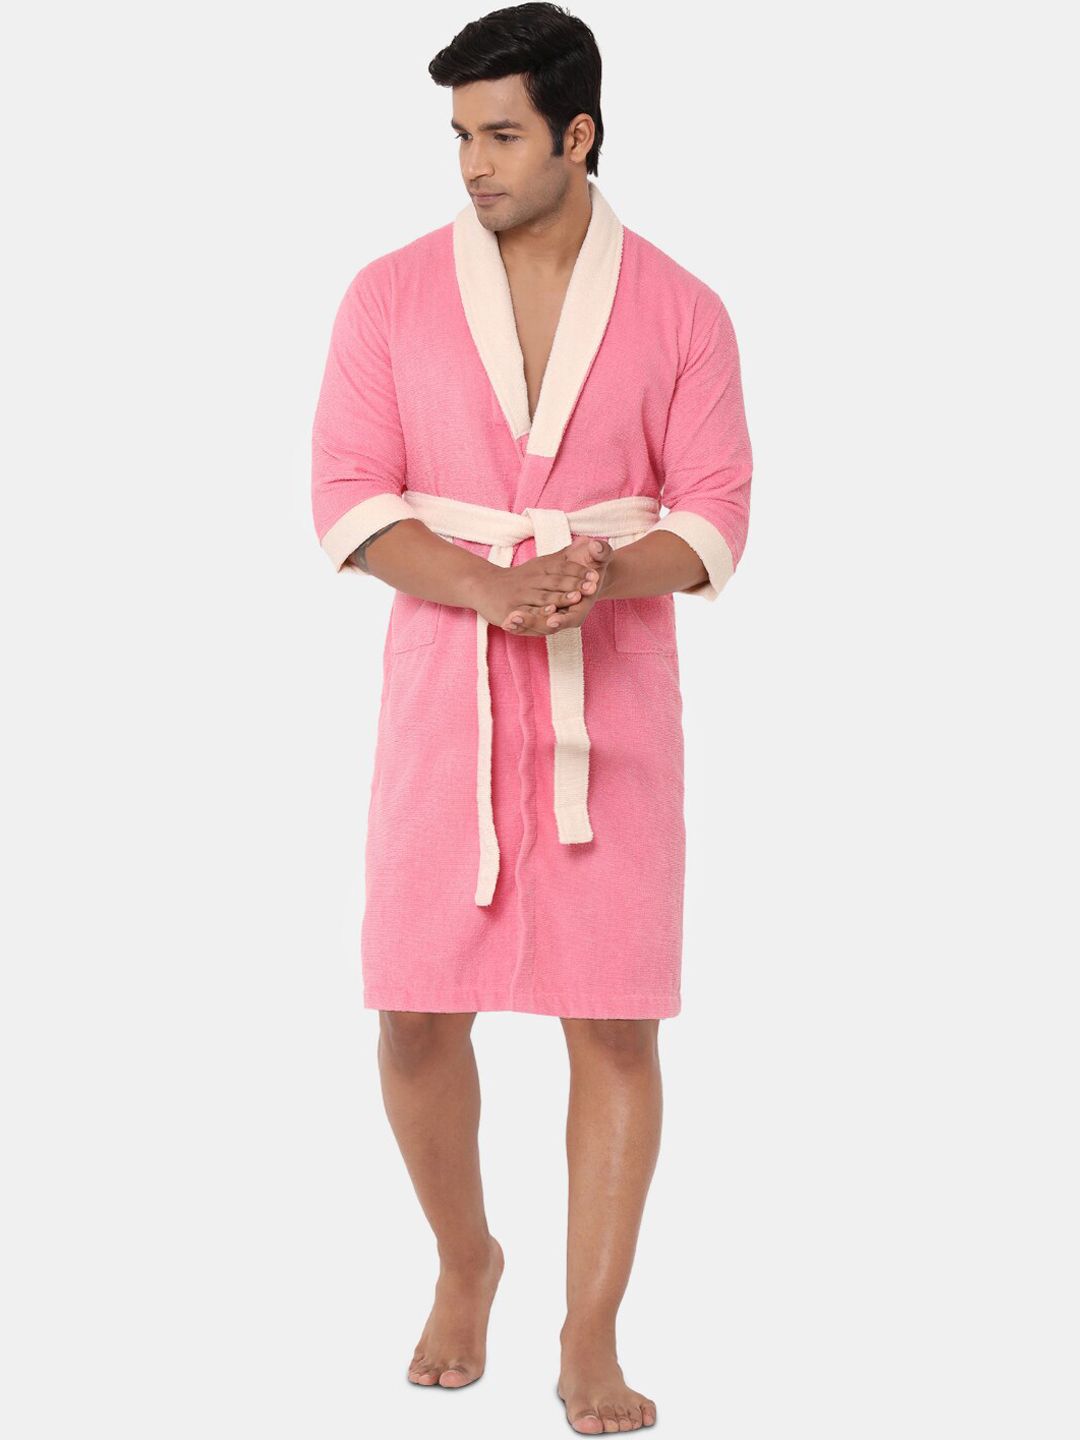 SPACES Unisex Pink Solid 100% Cotton 300 GSM Bath Robe Price in India